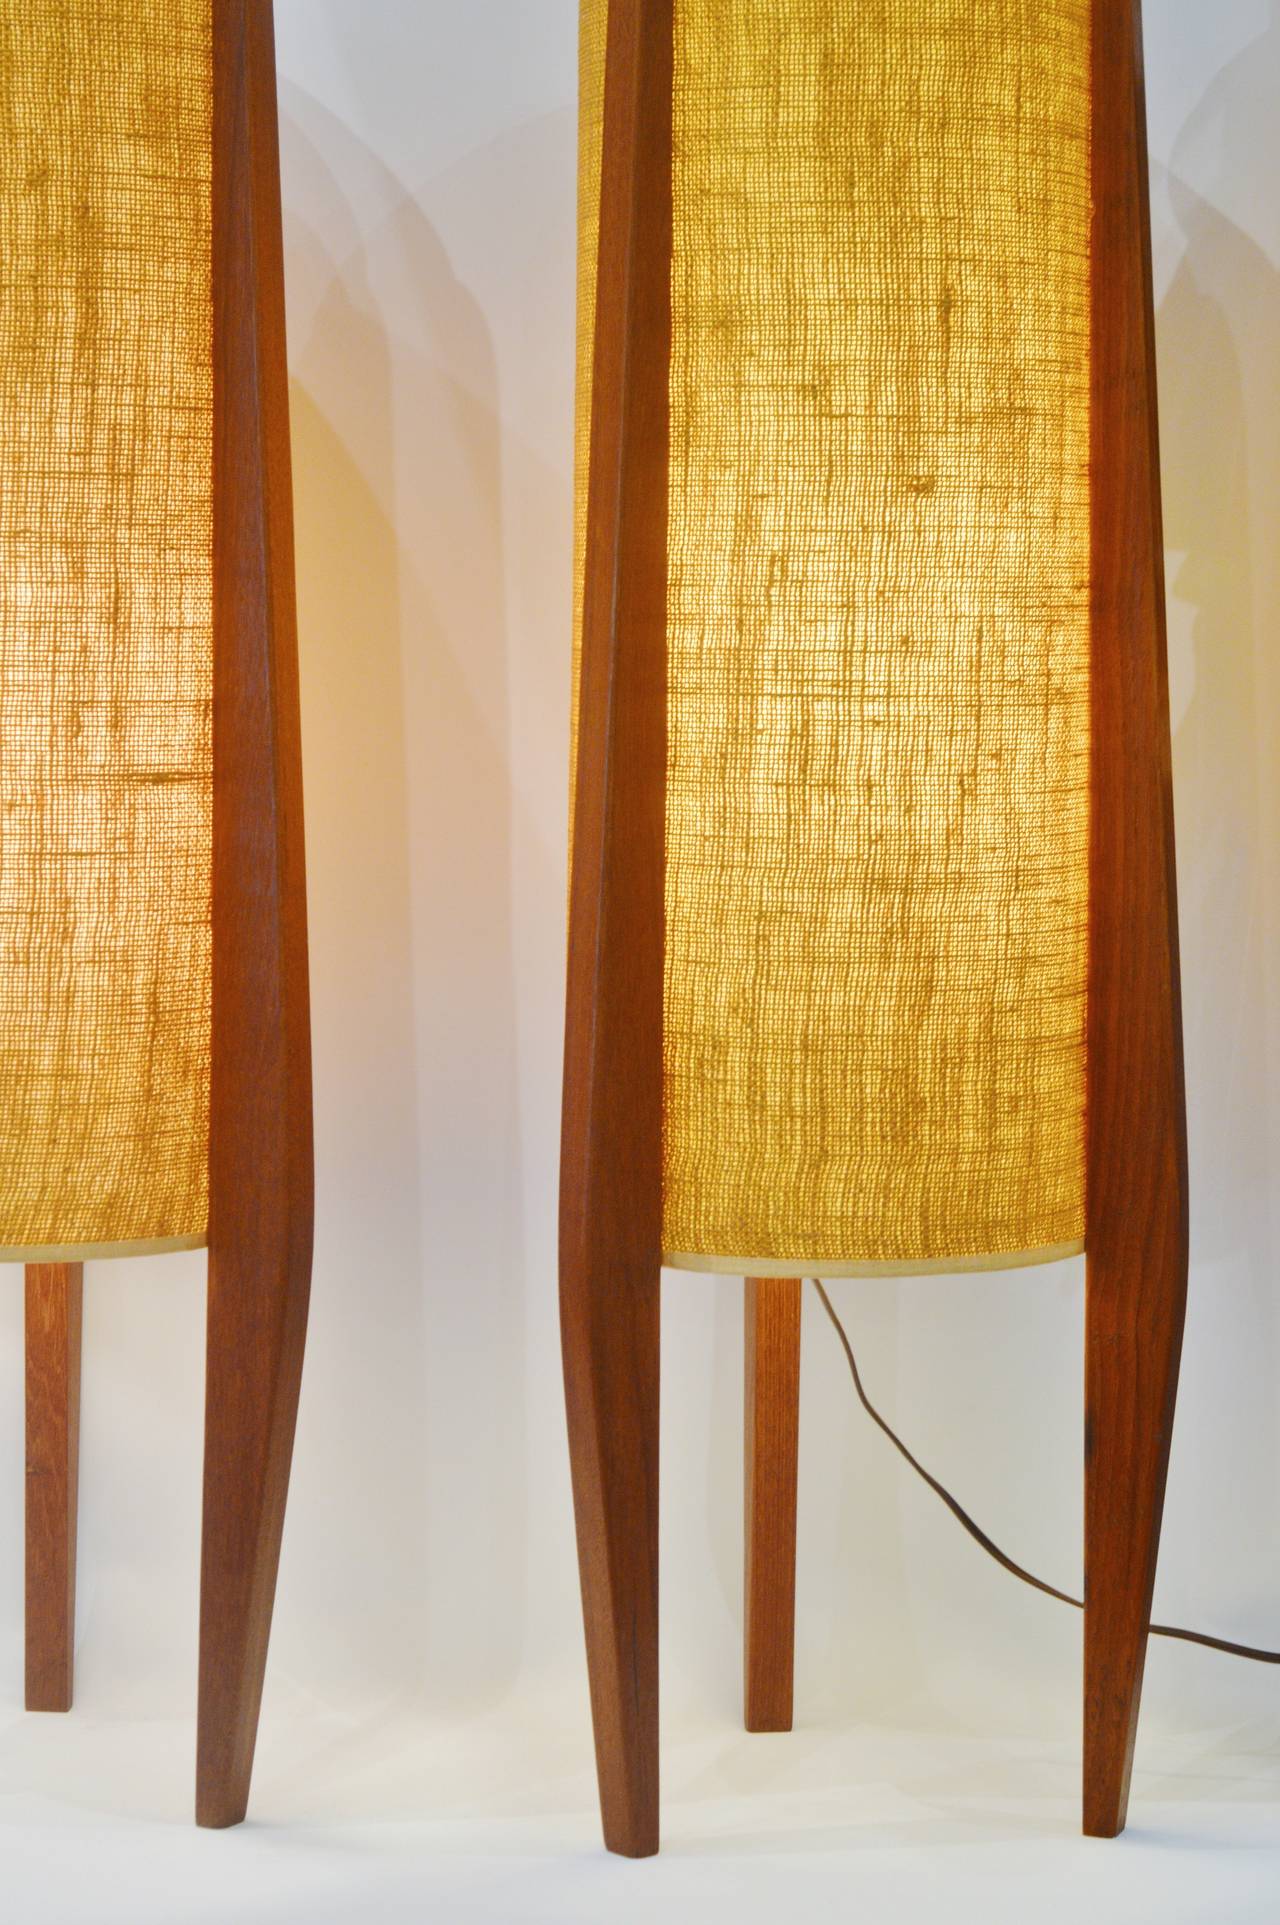 Pair of Large Danish Modern Teak and Jute Table or Floor Lamps In Good Condition In New Westminster, British Columbia